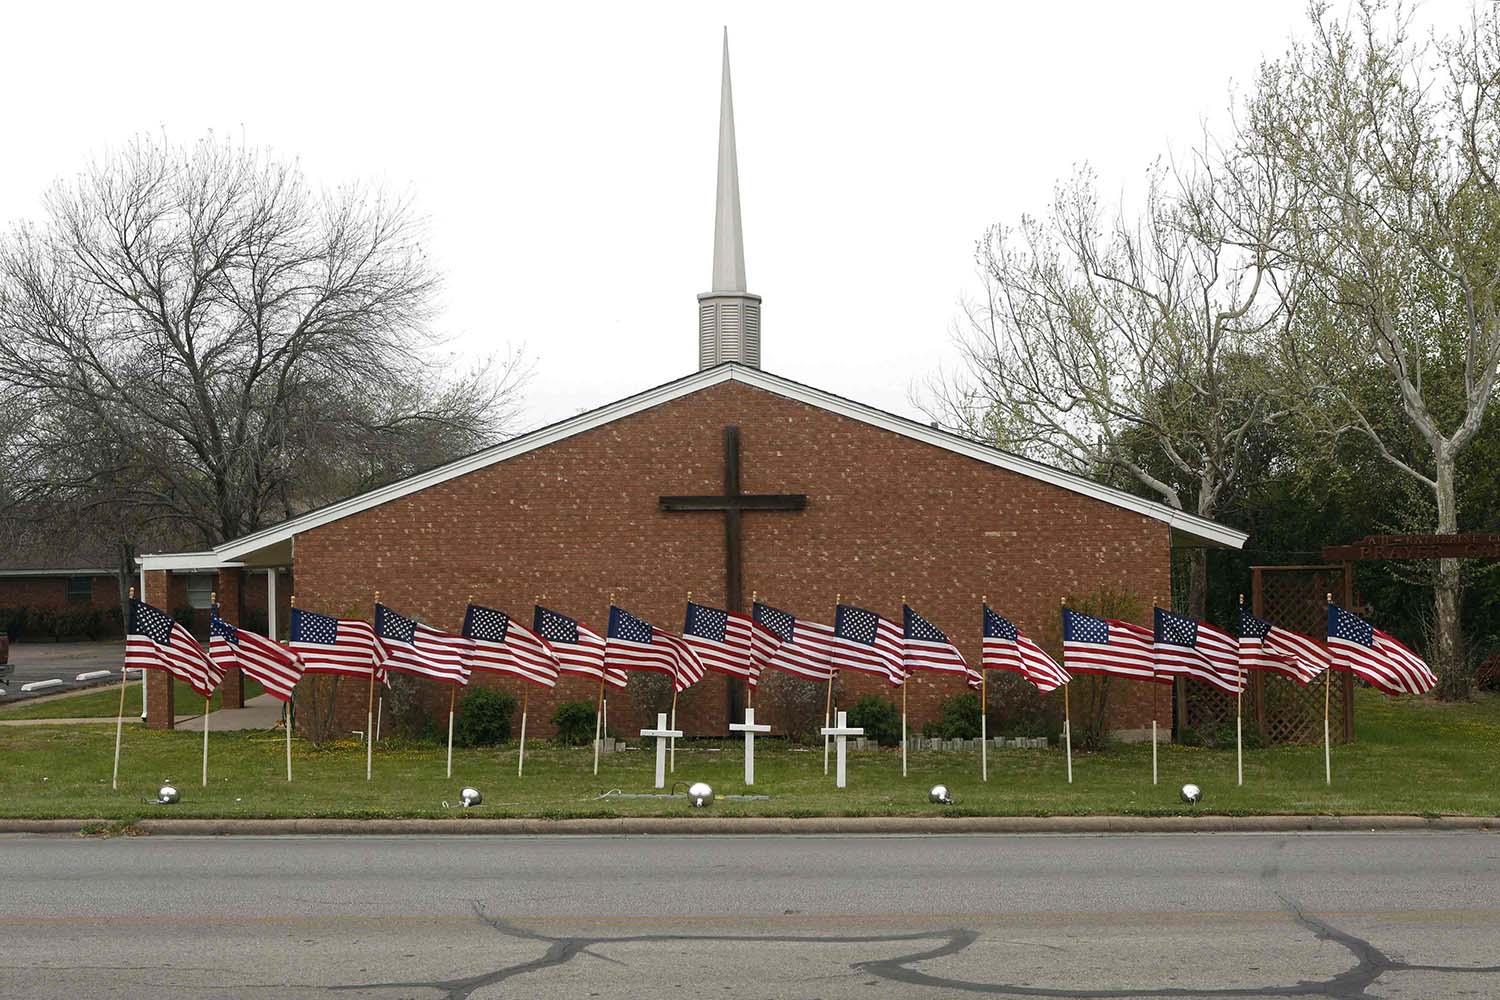 Apr. 3, 2014. U.S. flags are pictured in front of the Central Christian Church in Killeen, Texas where the Fort Hood Army Base is located. The commander of the base on Thursday identified the soldier suspected of shooting dead three people and wounding 16 on Wednesday as Ivan Lopez, 34.